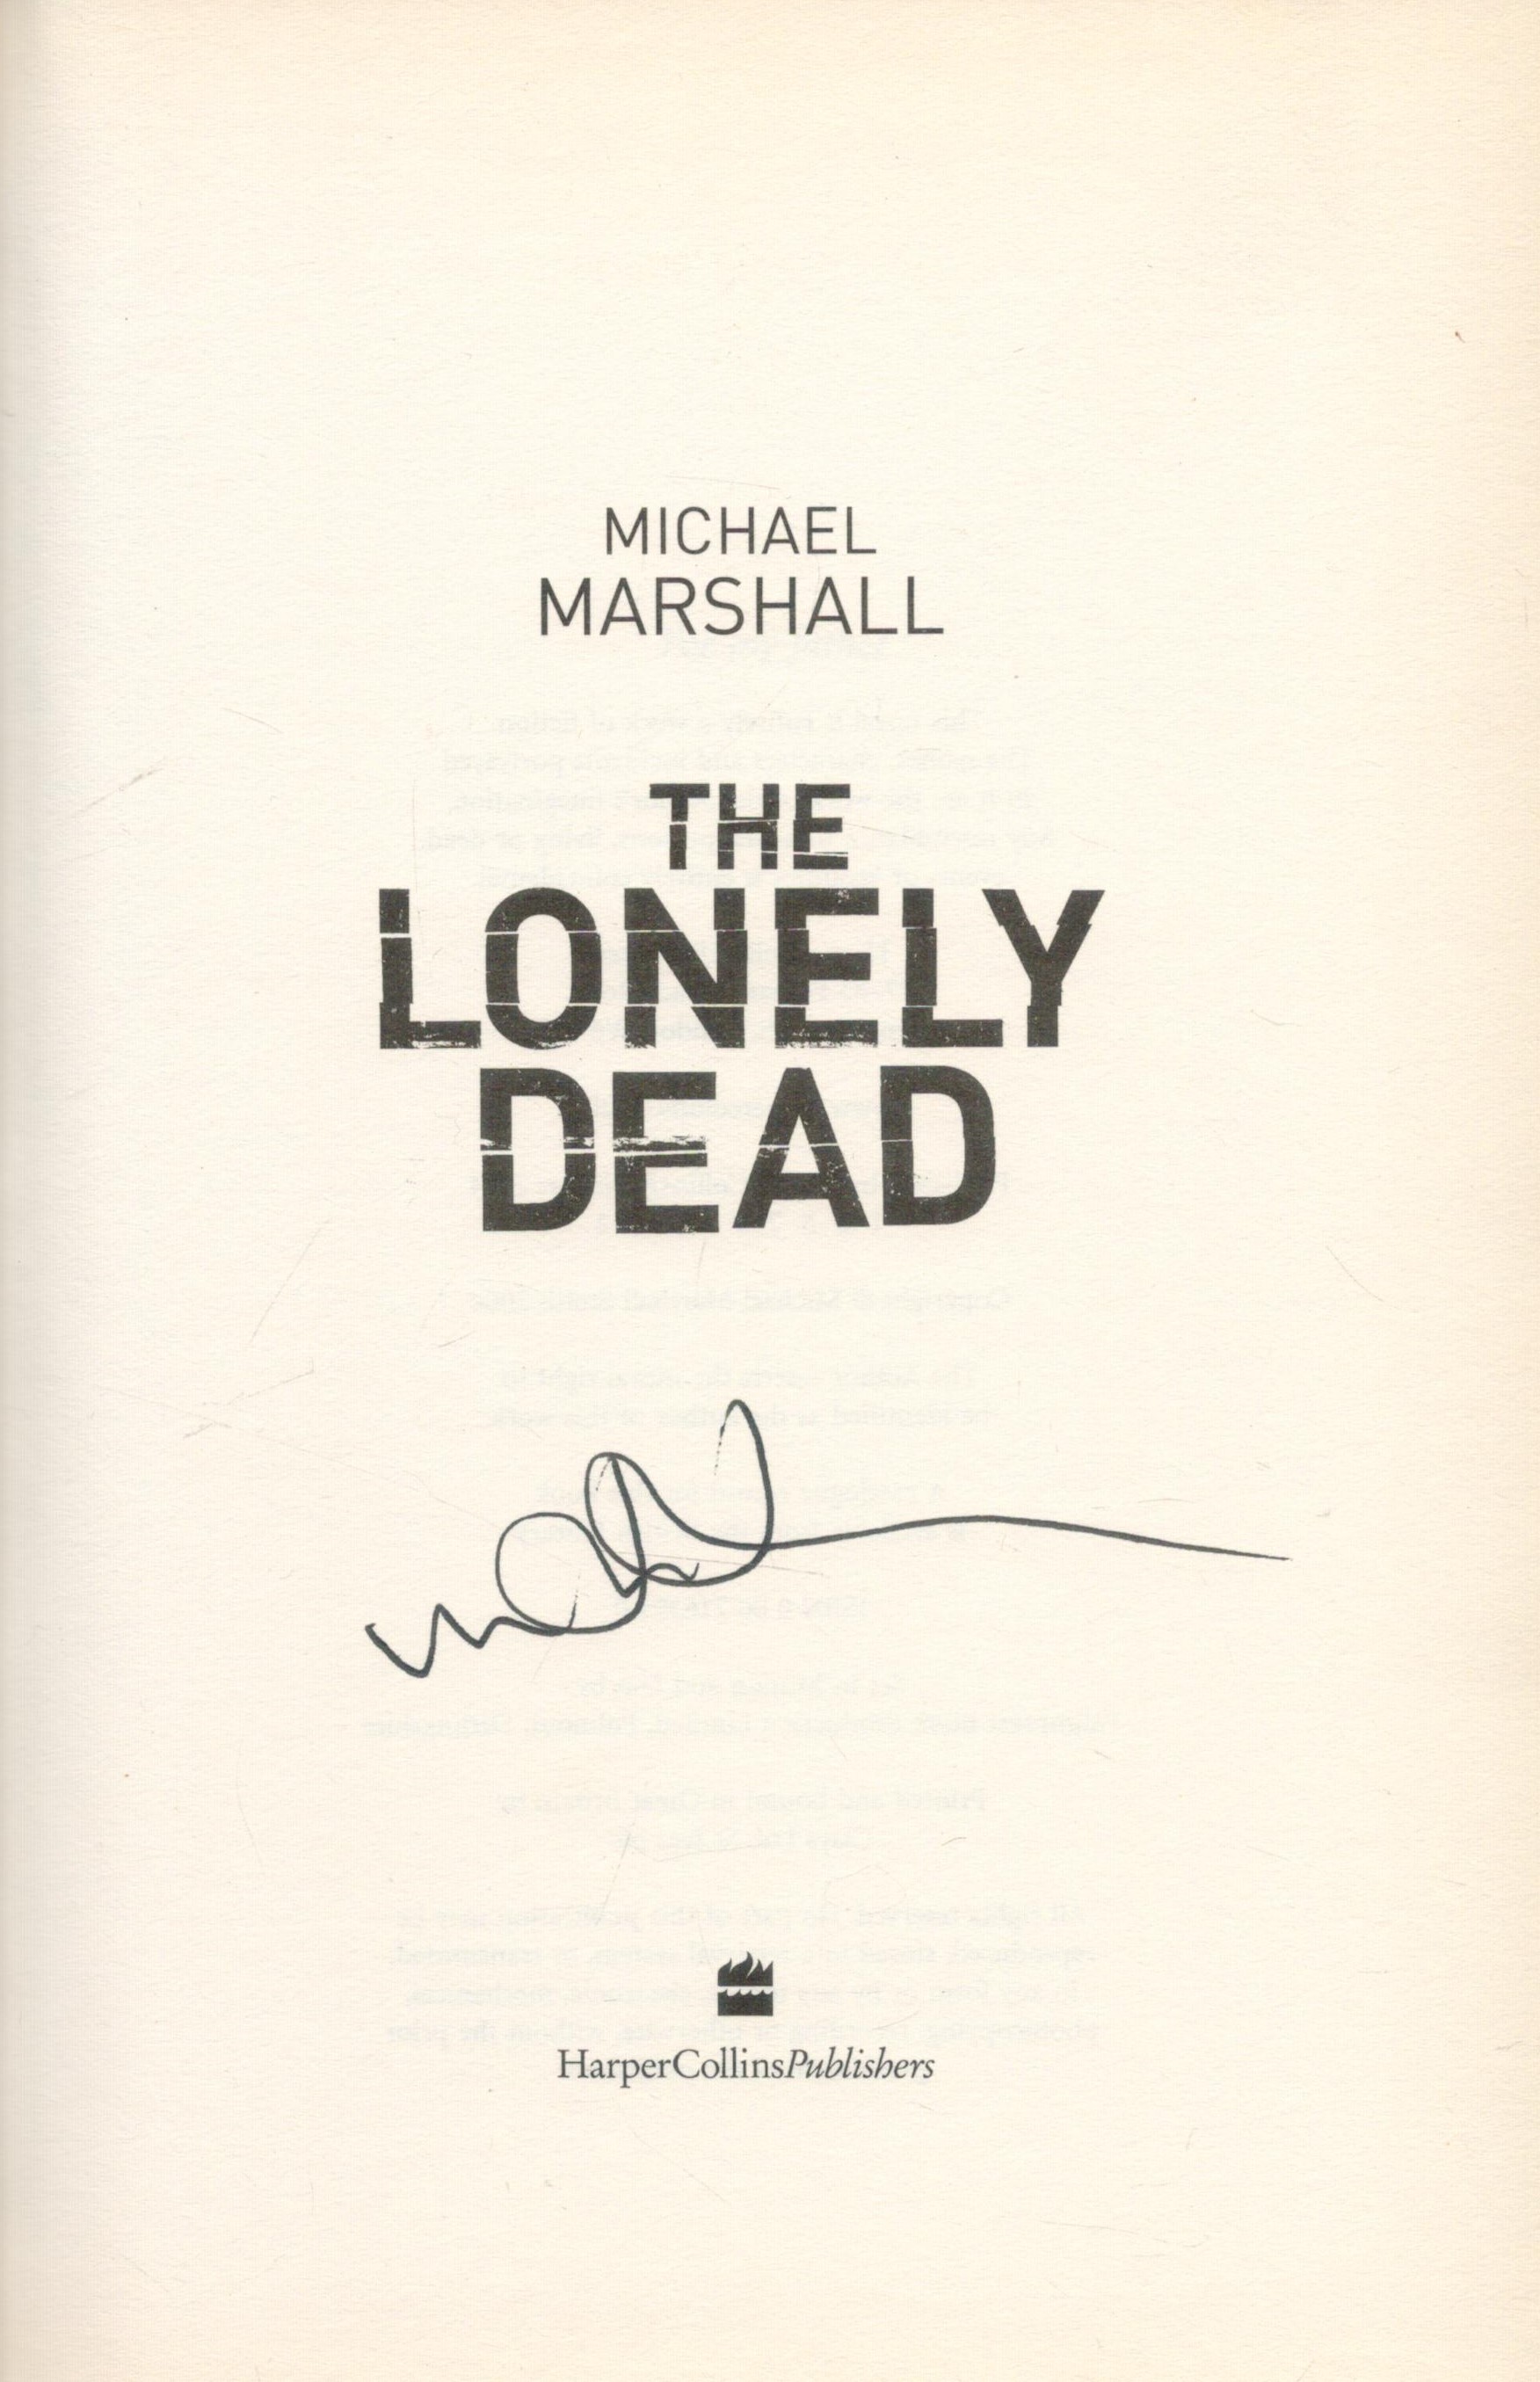 Michael Marshall Signed Book - The Lonely Dead - The truth is buried with them by Michael Marshall - Image 2 of 3